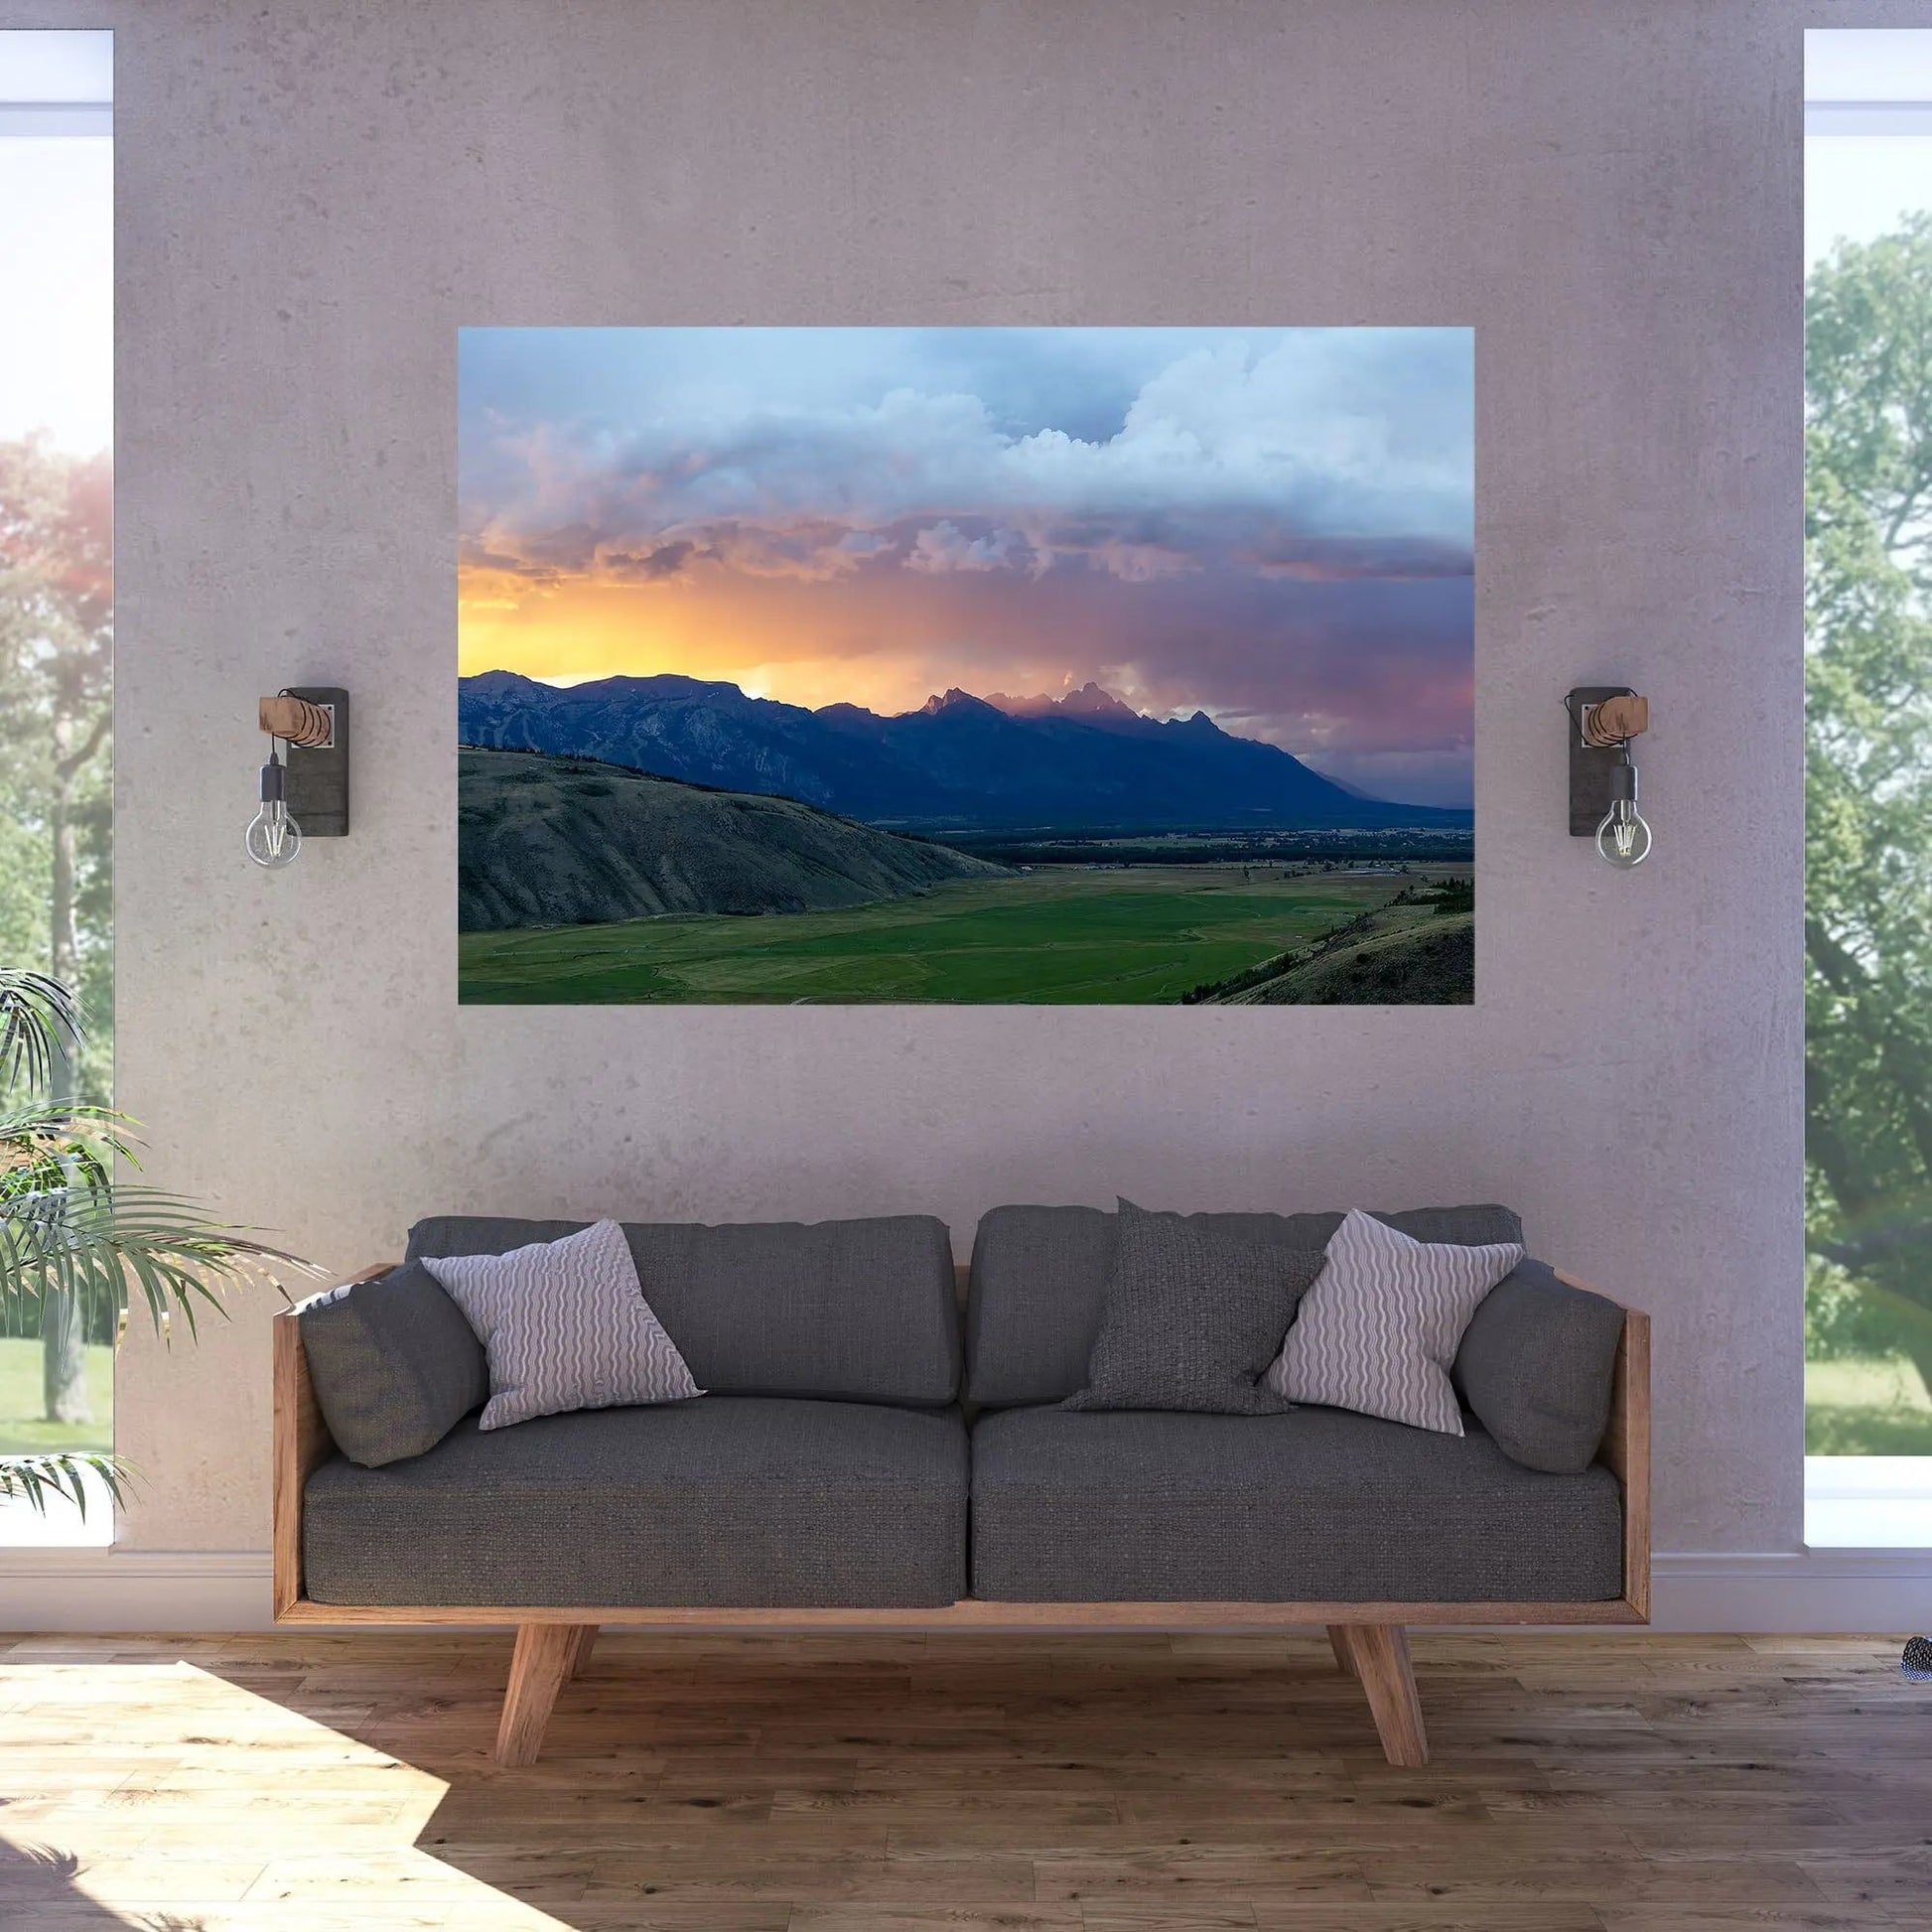 teton mountain sunset on wall behind couch 60x40 trulife acrylic home decor nature wall art multi-hued sky